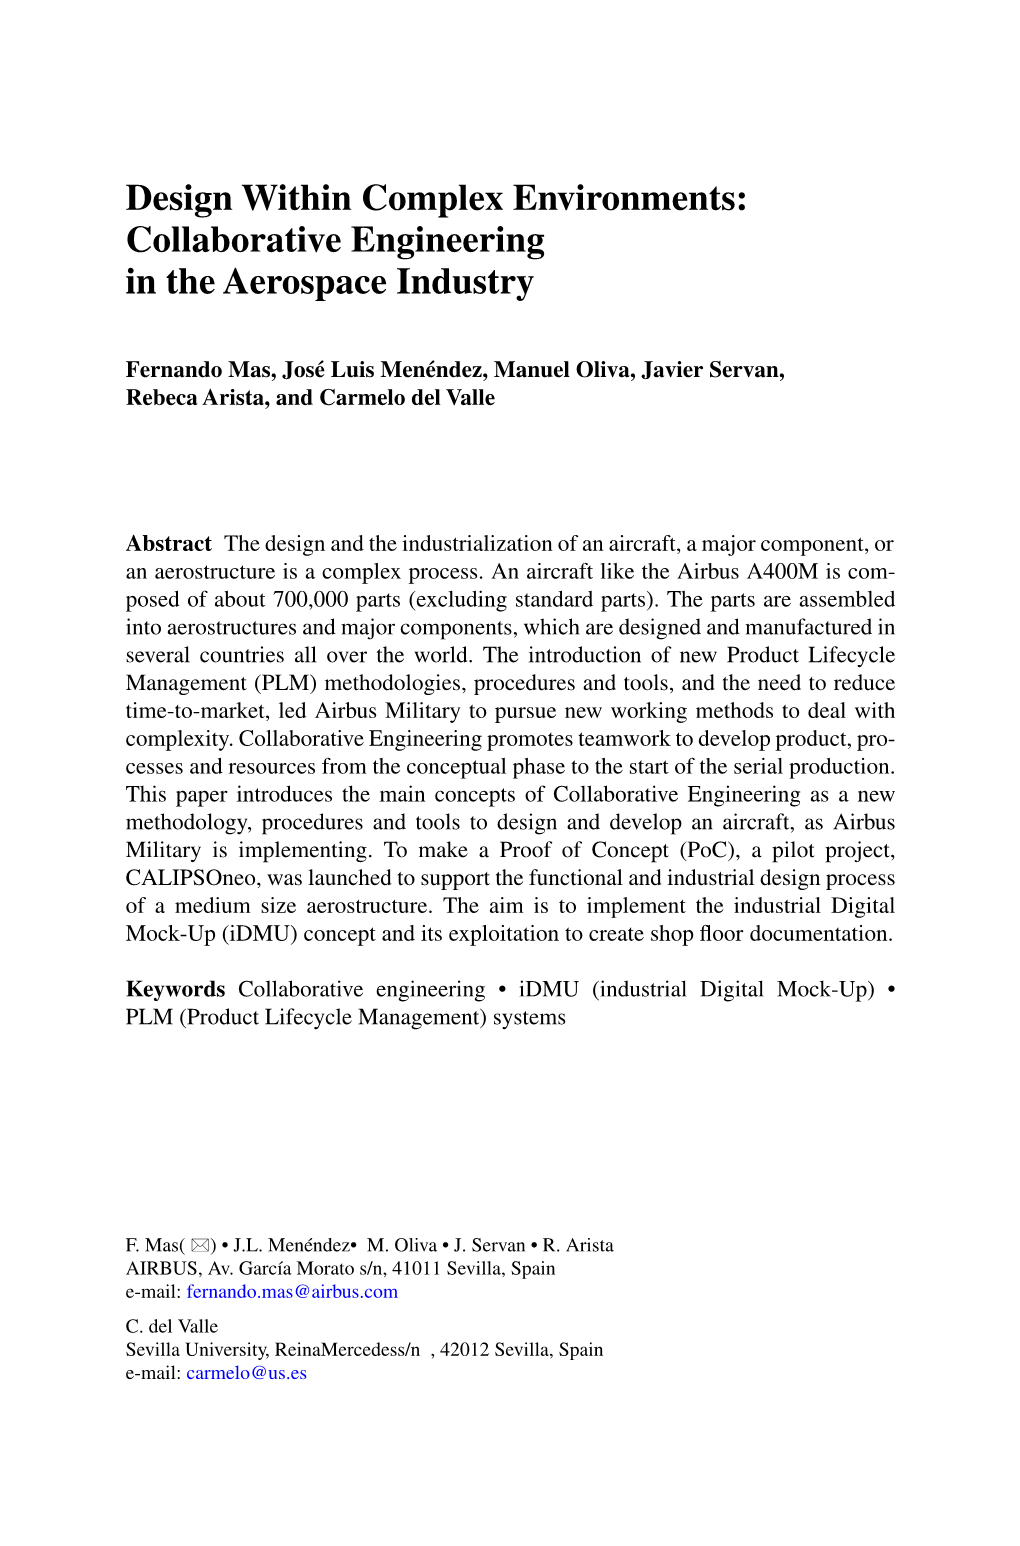 Design Within Complex Environments: Collaborative Engineering in the Aerospace Industry